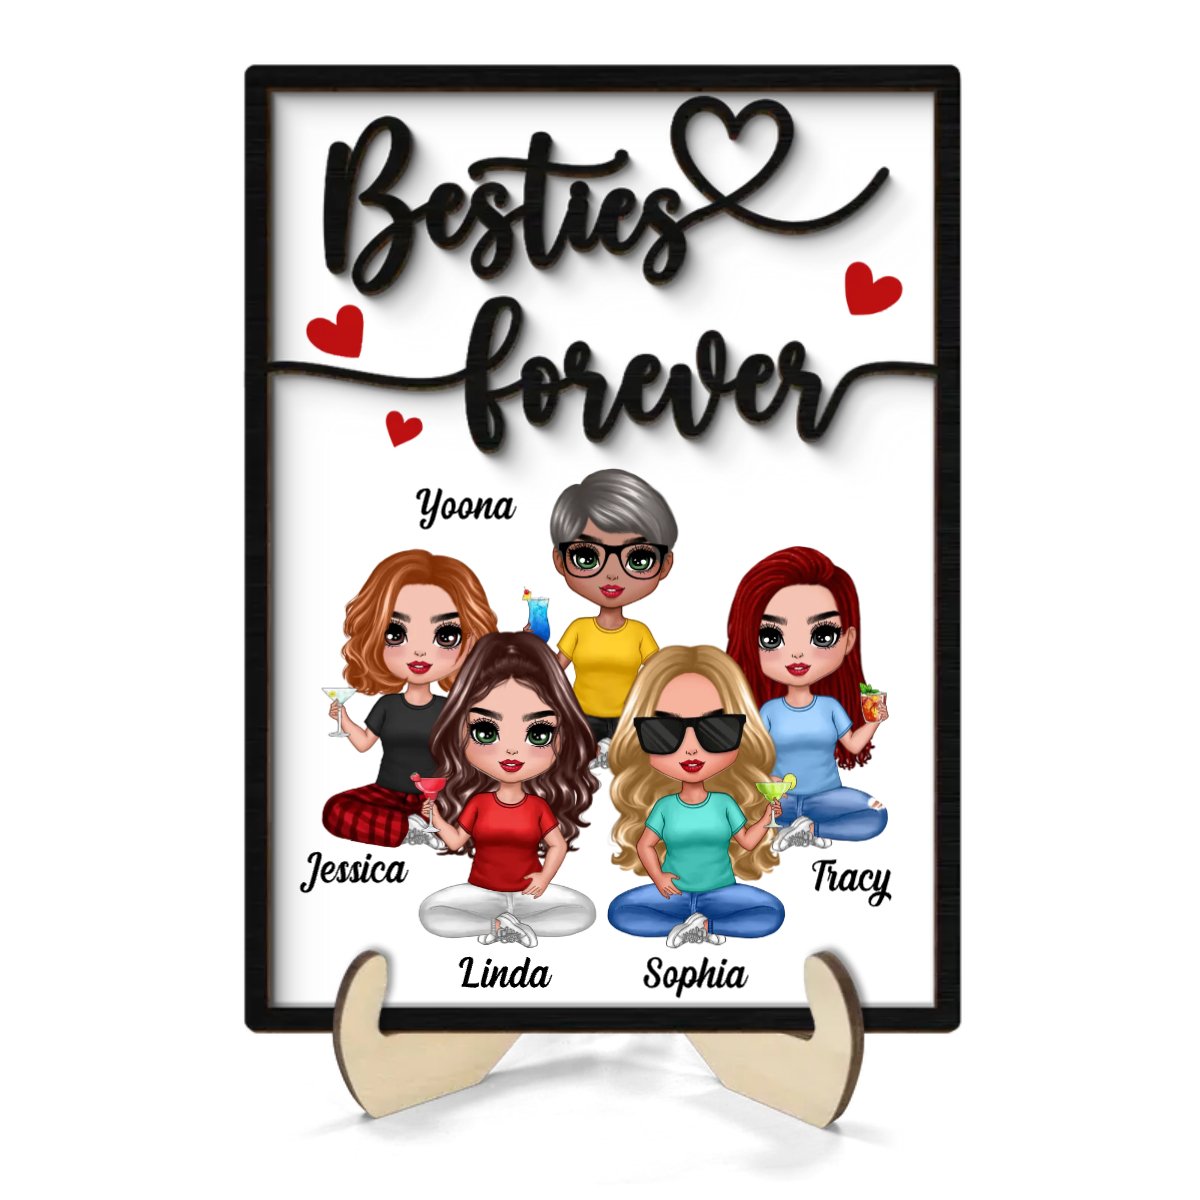 Besties - Besties Forever - Personalized Wooden Plaque (TL) - The Next Custom Gift